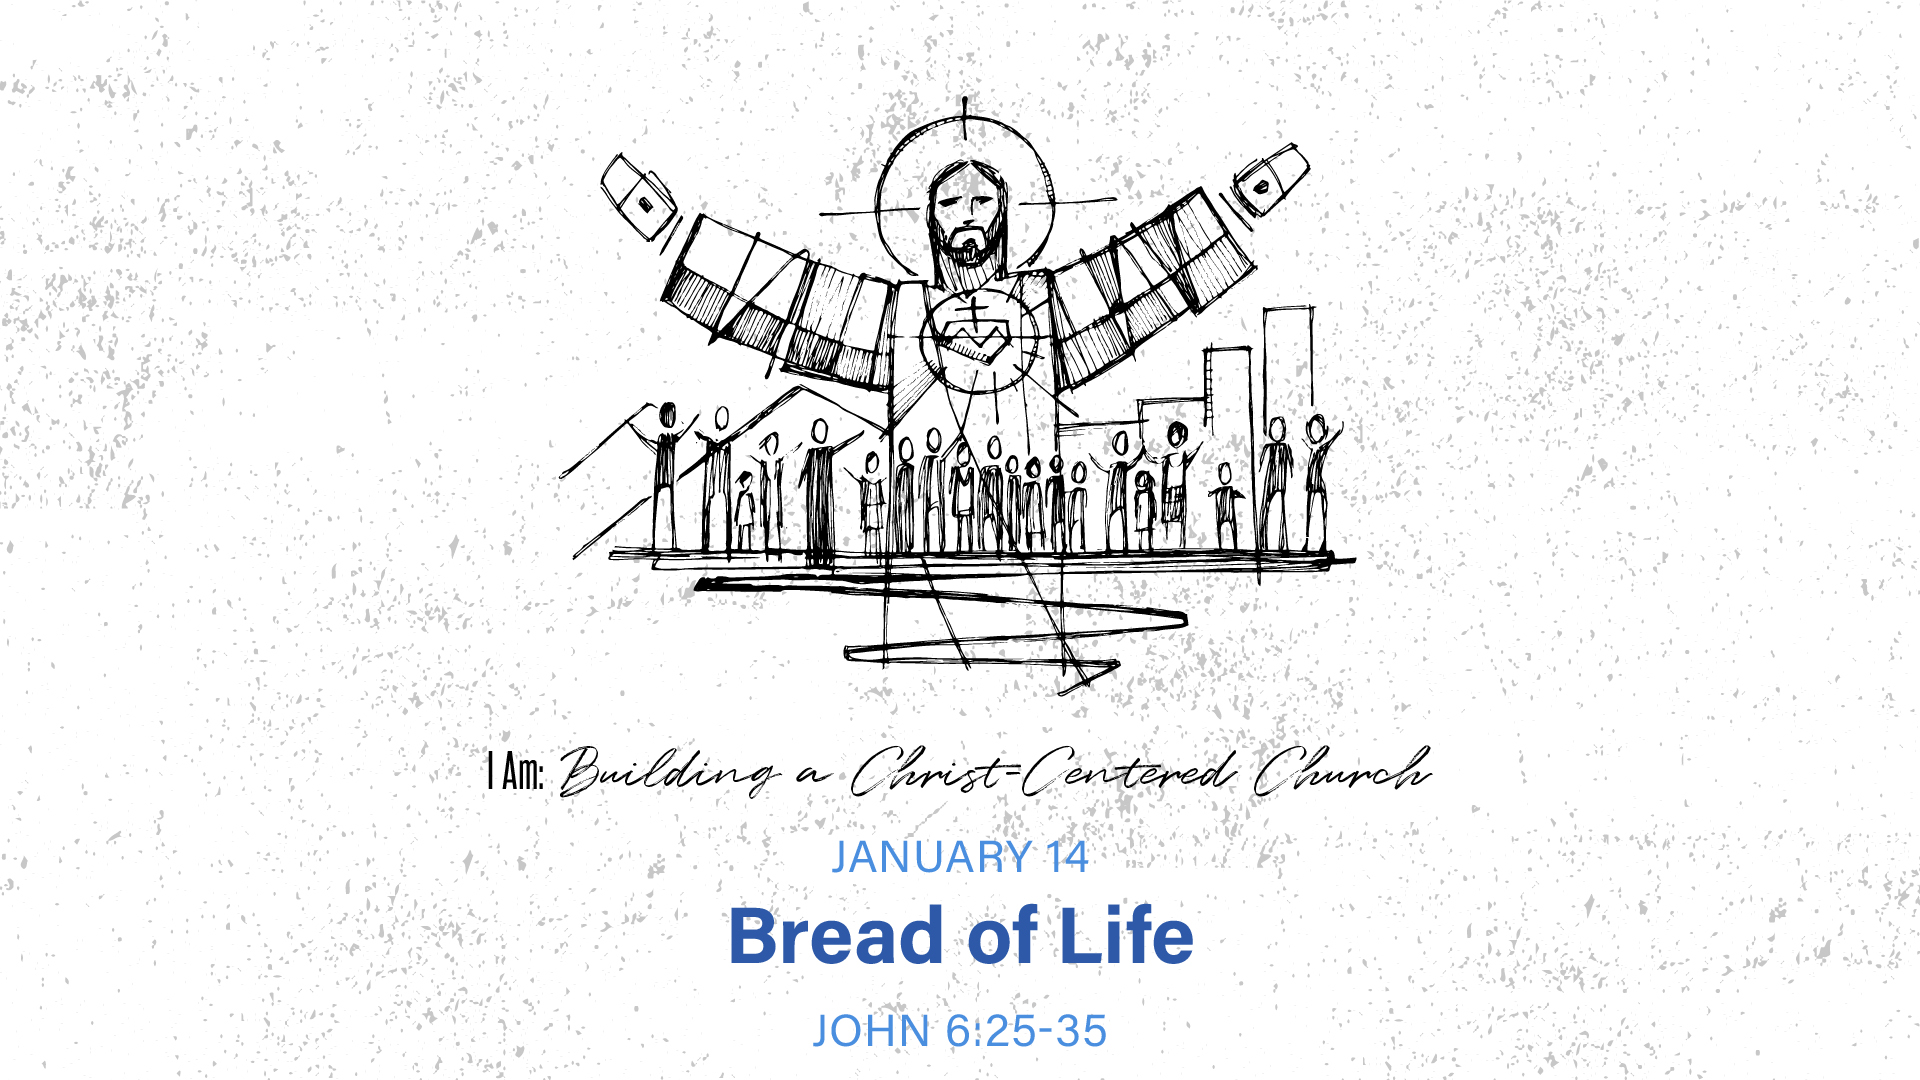 I Am: Building a Christ-Centered Church: Bread of Life